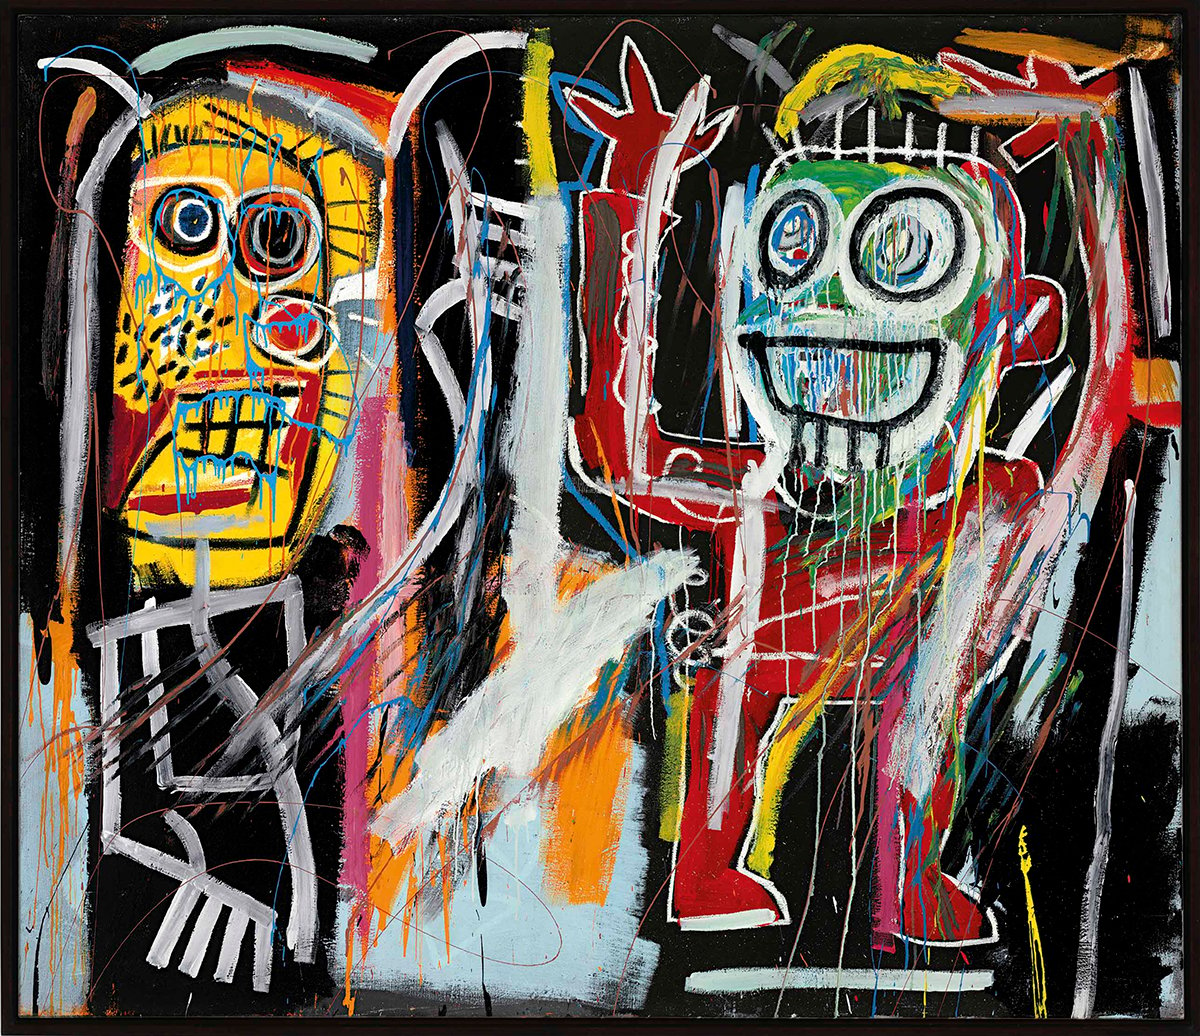 Jean-Michel Basquiat's 1982 painting “Dustheads” depicting two high-energy figures, representative of drug addicts on angel dust, set against a pitch-black backdrop. The figures are painted with bold, dynamic strokes in vibrant colors, creating a sense of chaos and frenzied movement.